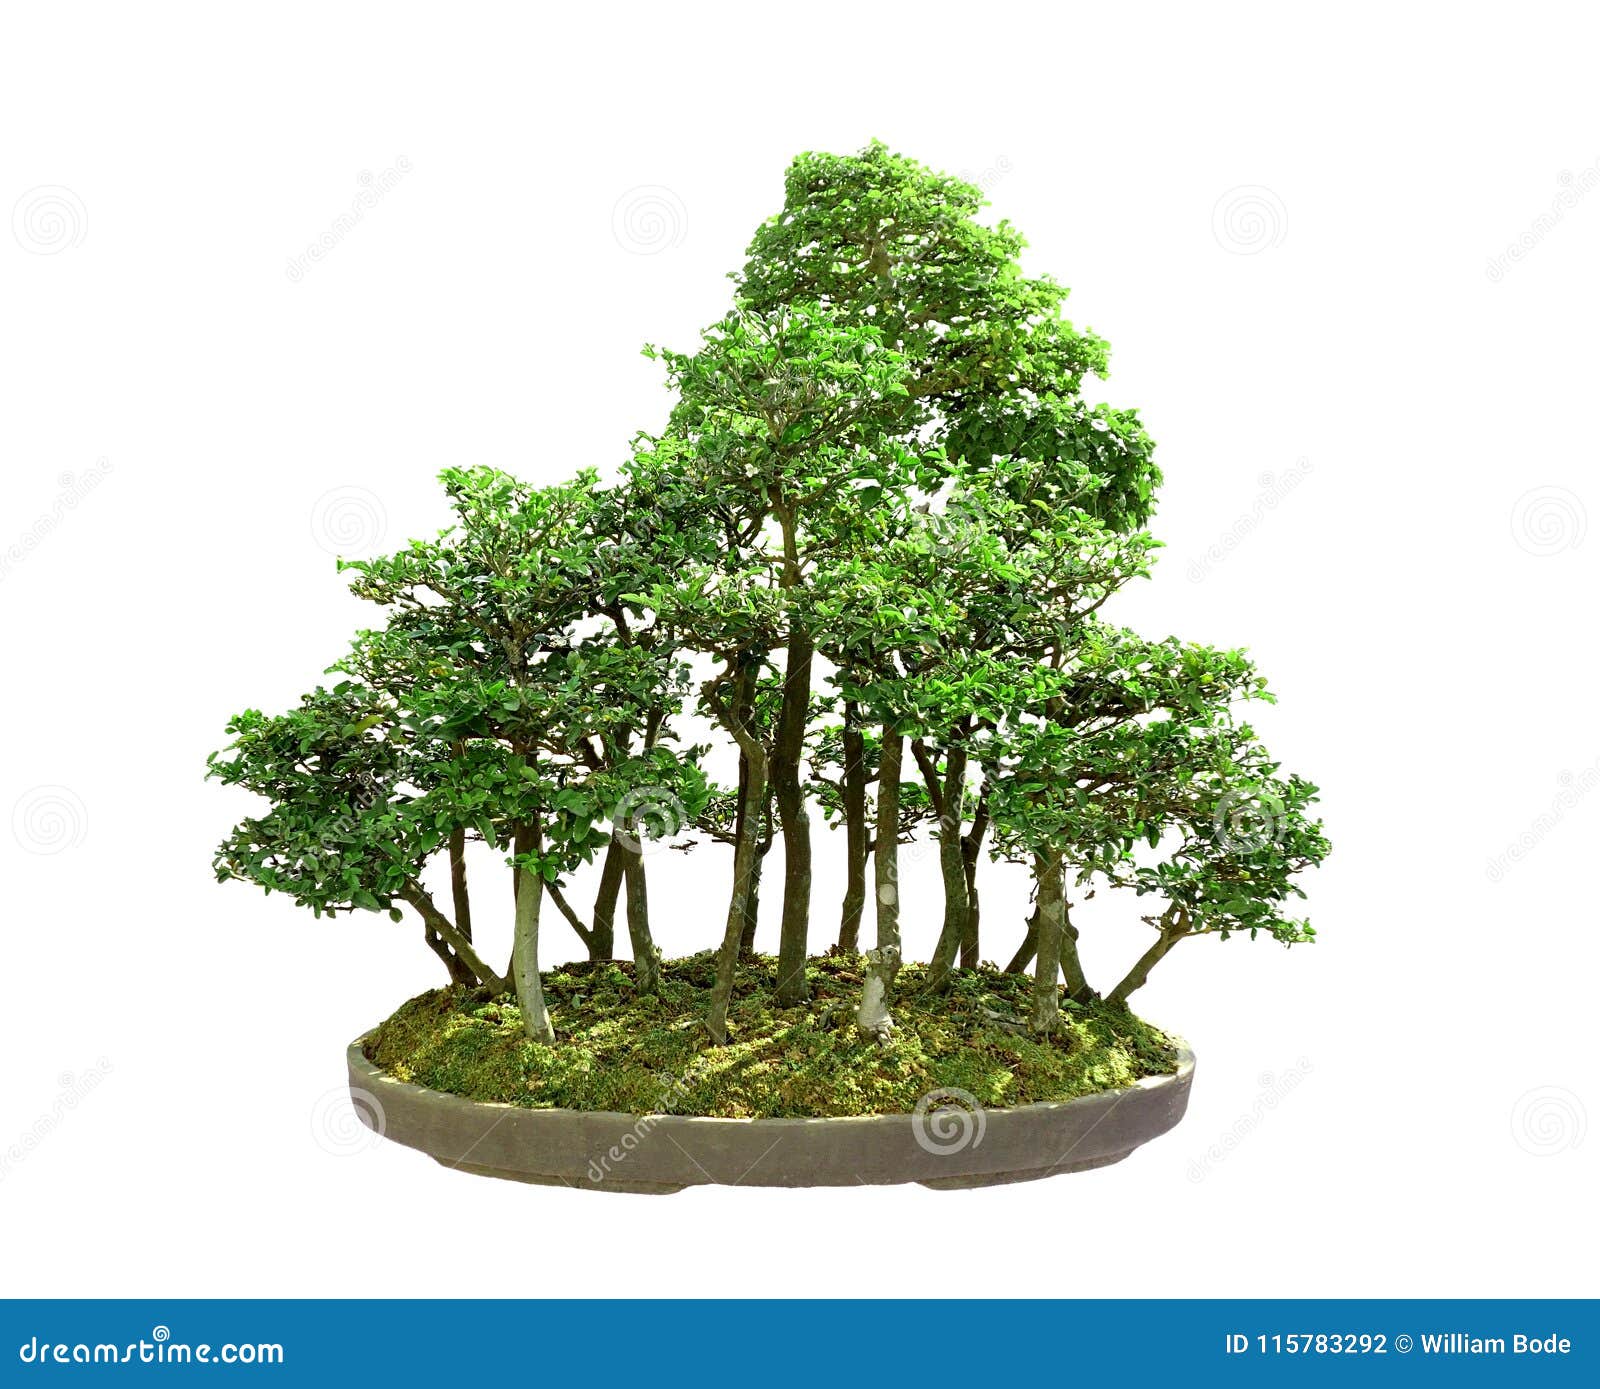 Isolated Bonsai  Forest  In Pot  Stock Photo Image of floor 